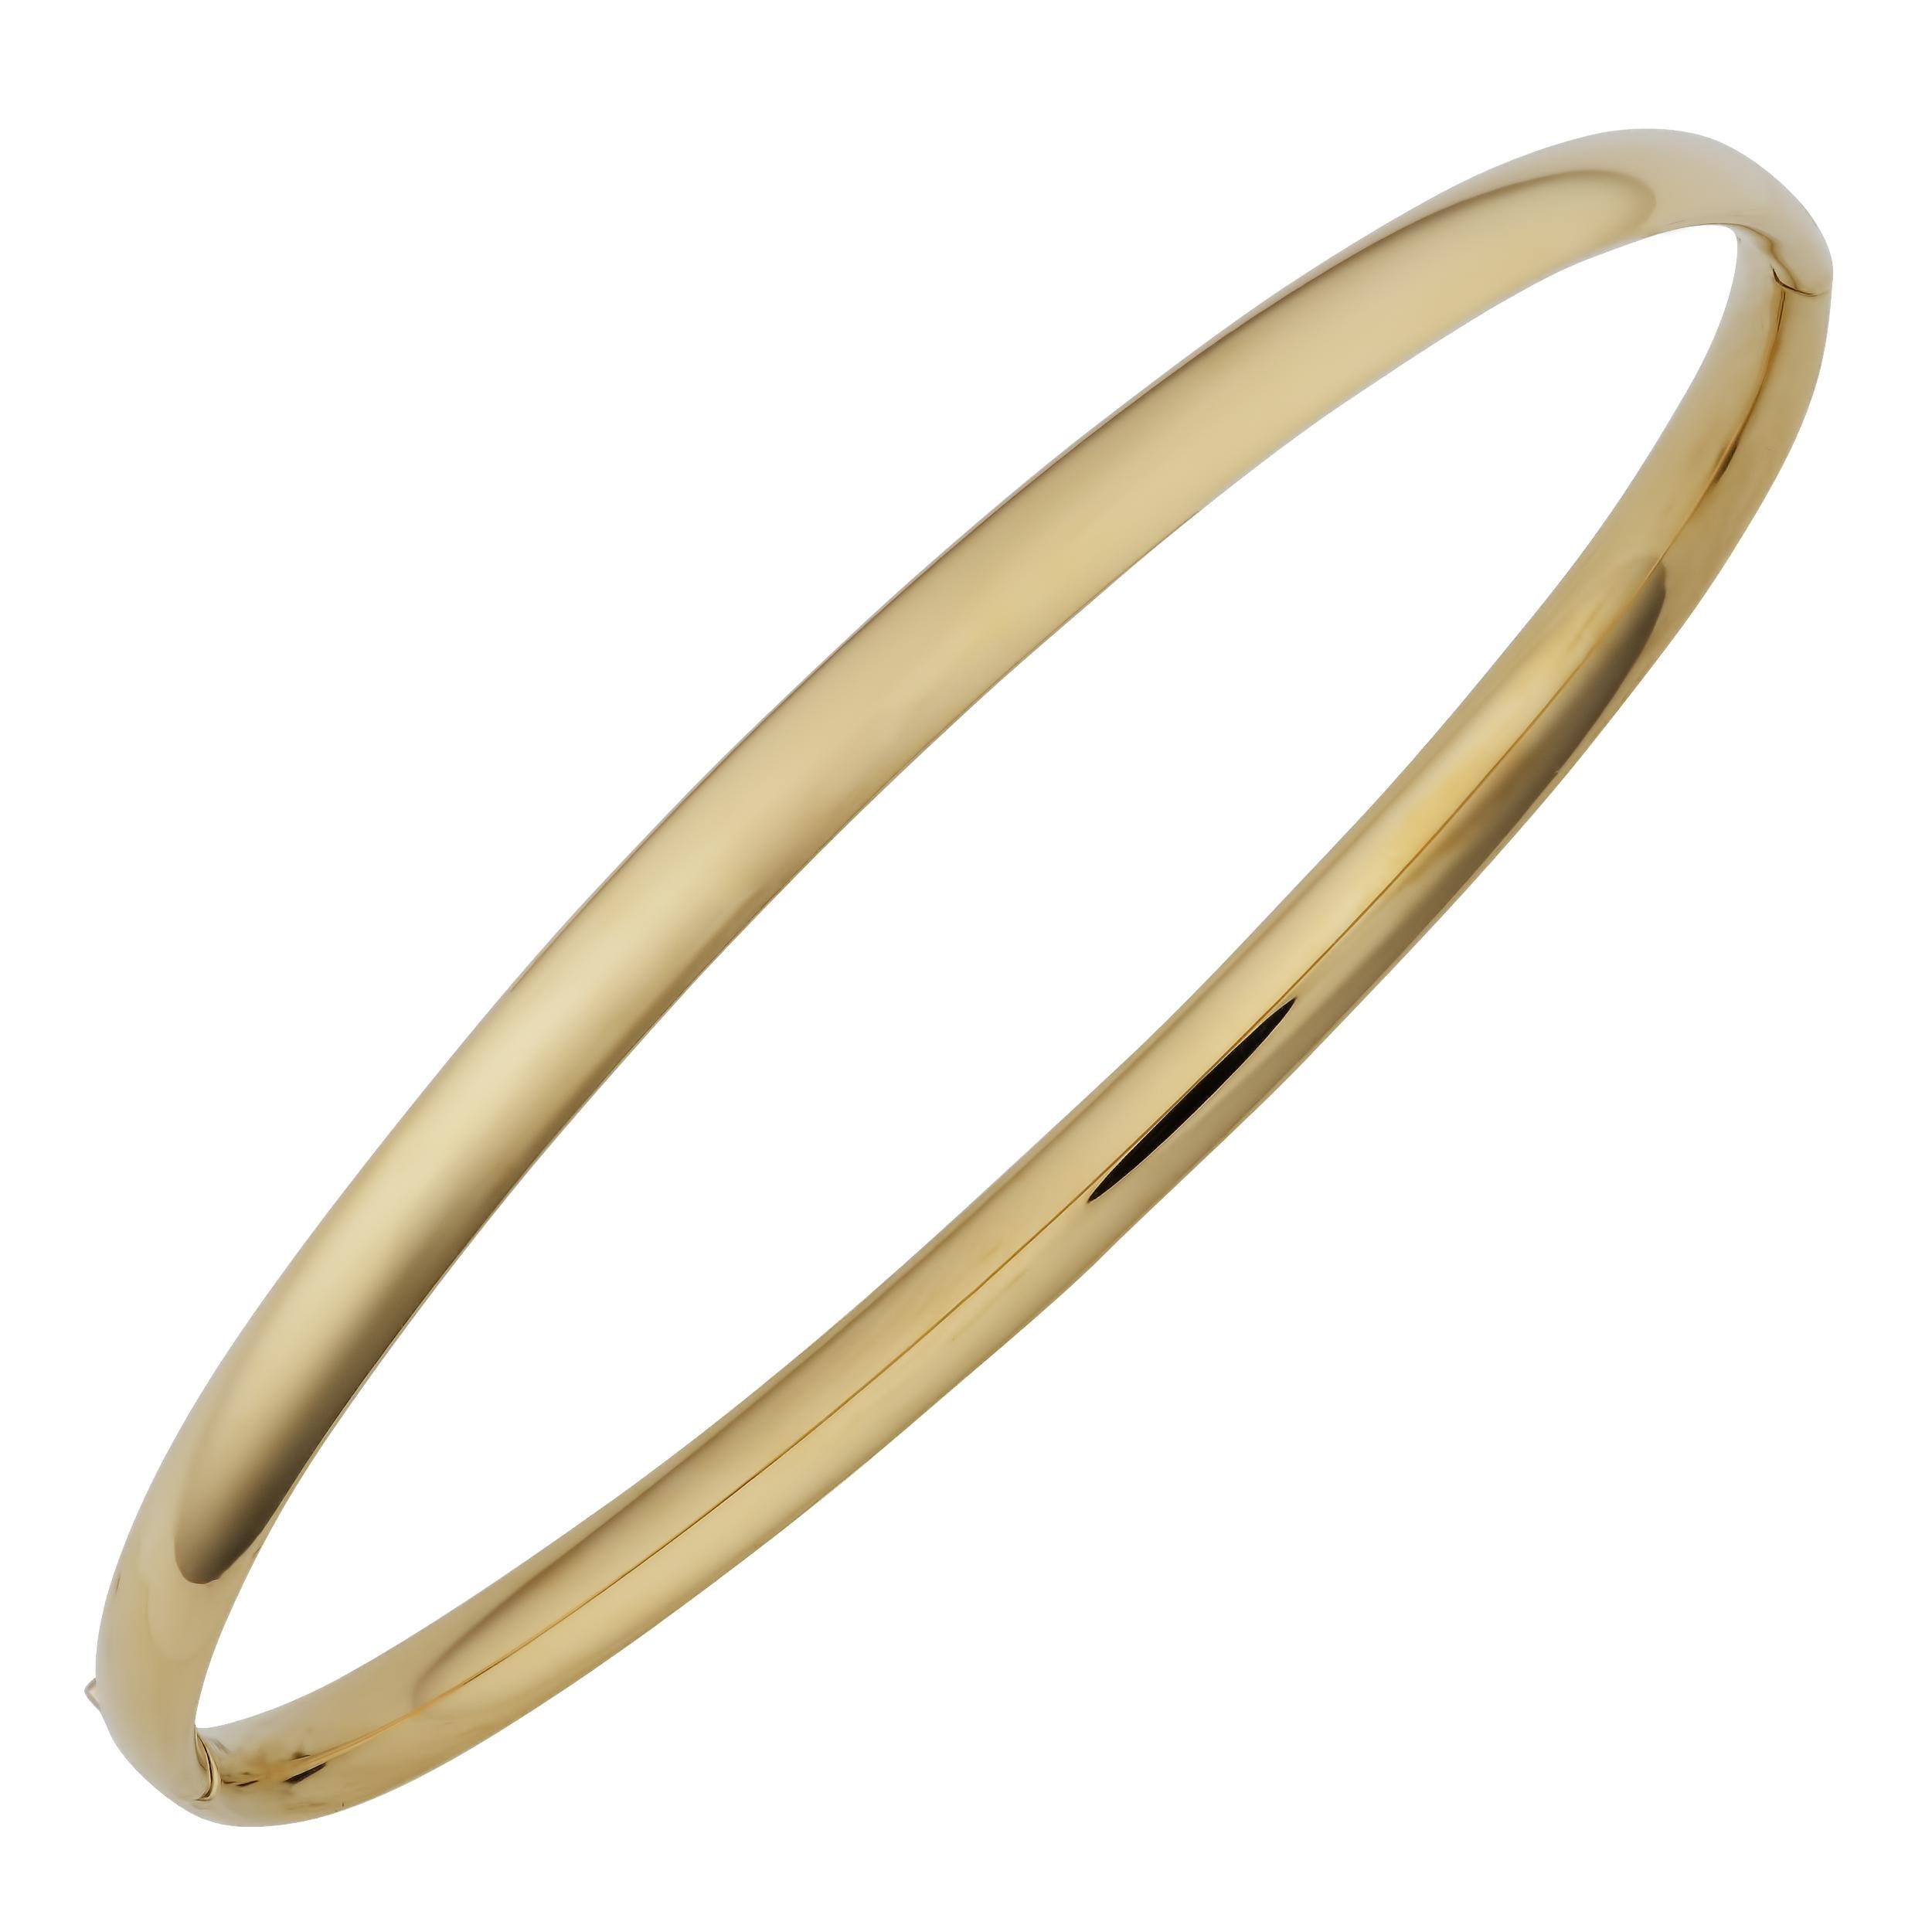 14K Gold Stackable Bangle in 4MM Thick. 7 inch Diameter.

This piece is perfect for everyday wear and makes the perfect Gift! 

We certify that this is an authentic piece of Fine jewelry. Every piece is crafted with the utmost care and precision.